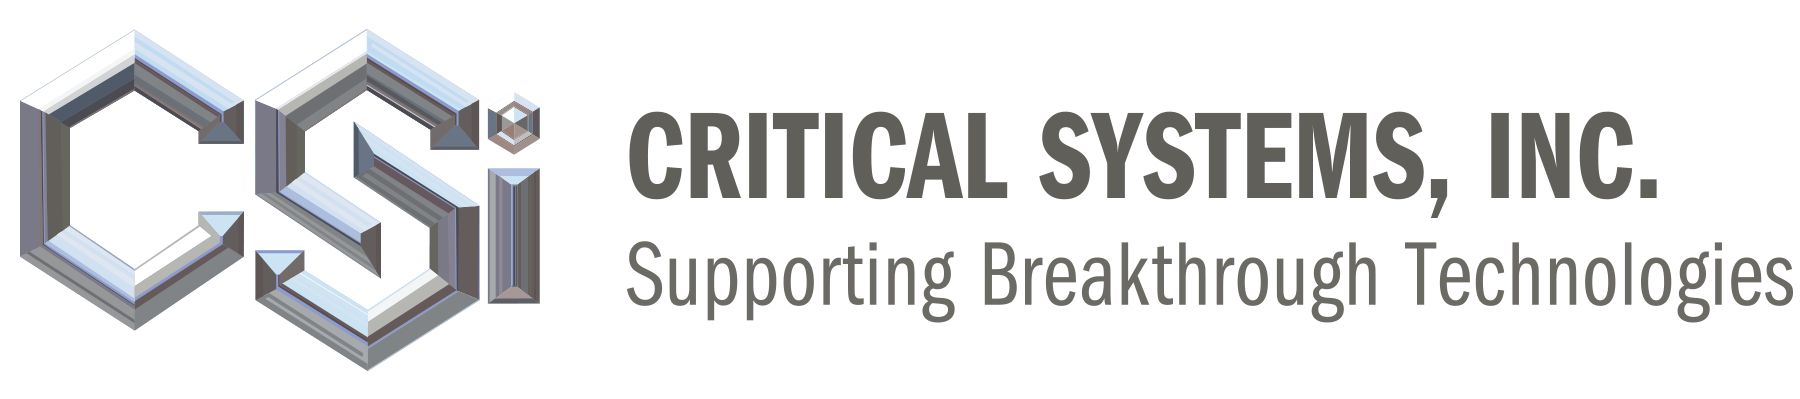 Critical Systems, Inc.